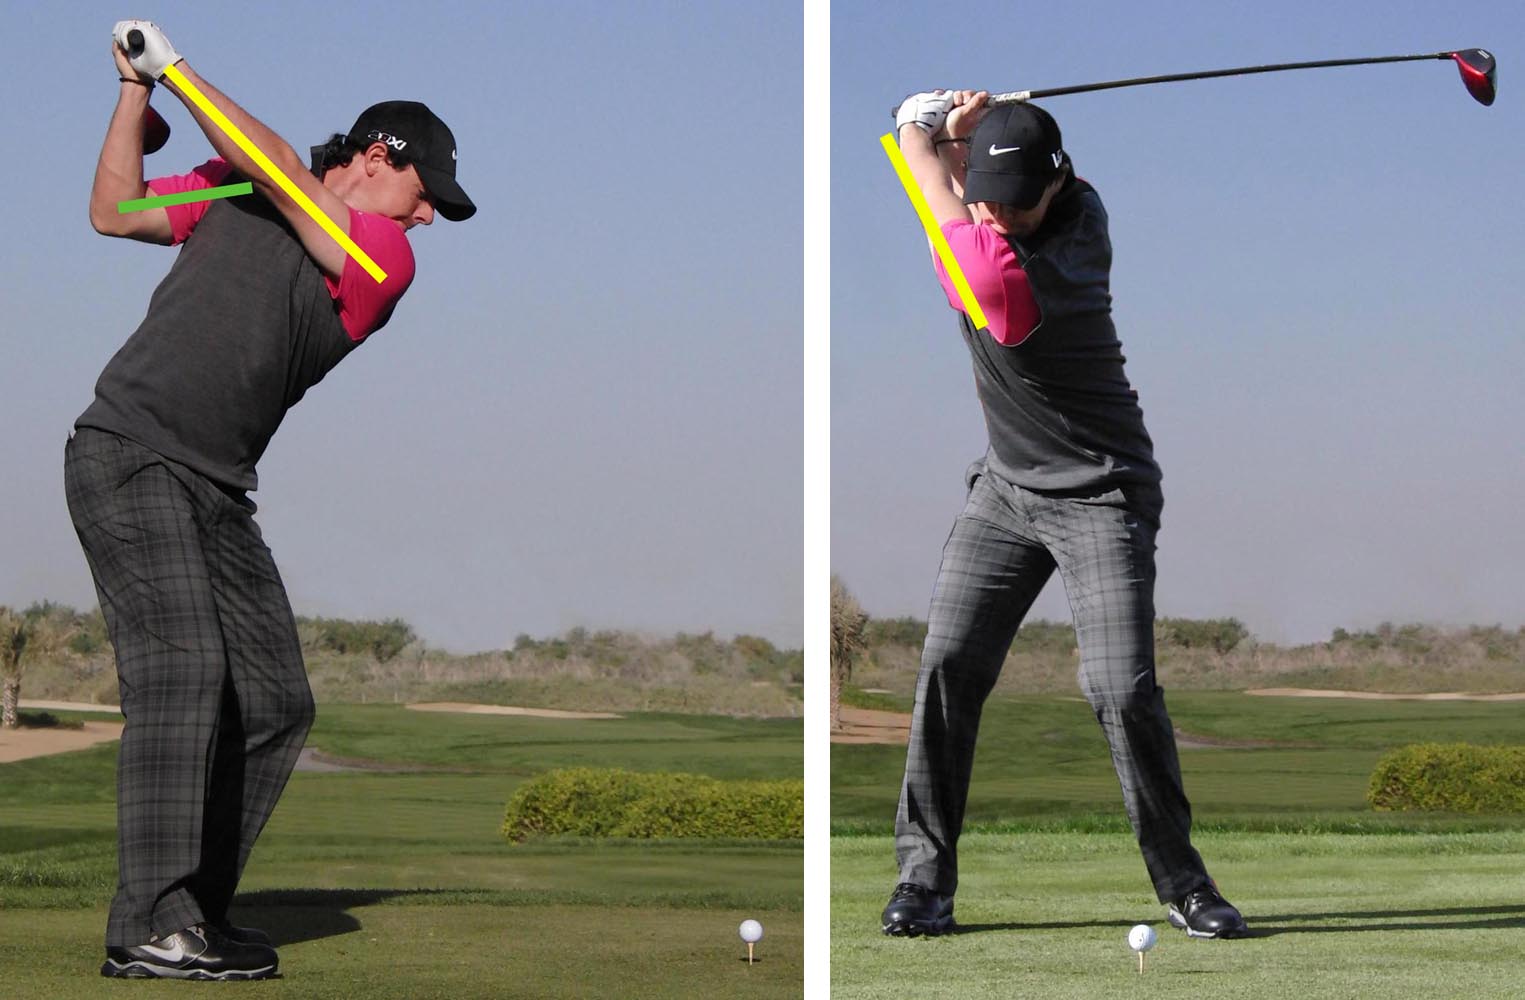 How to Make the Backswing the Simple Way